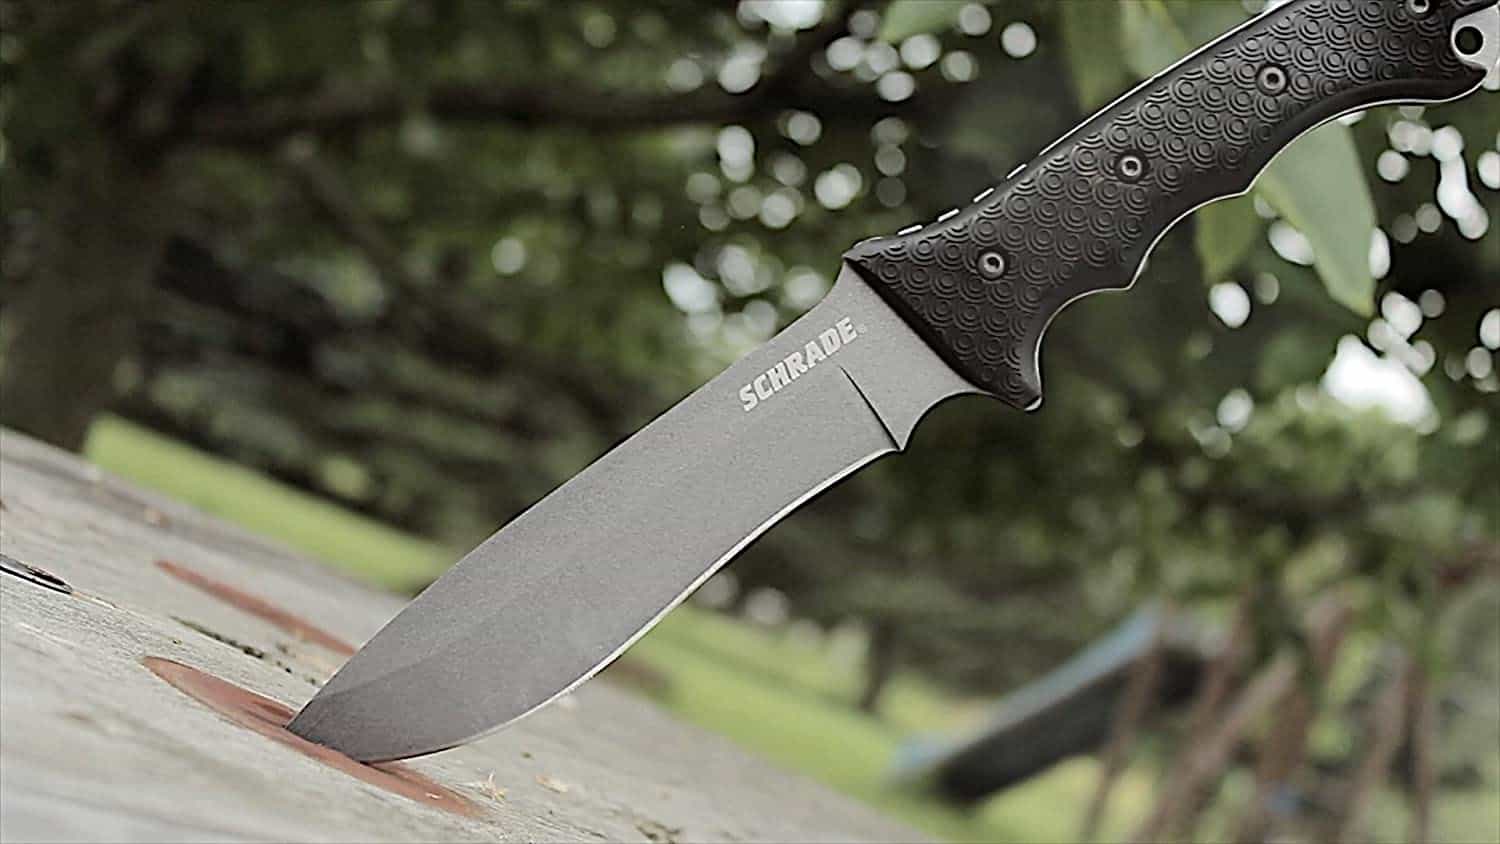 Schrade SCHF9 Extreme Survival Knife Review